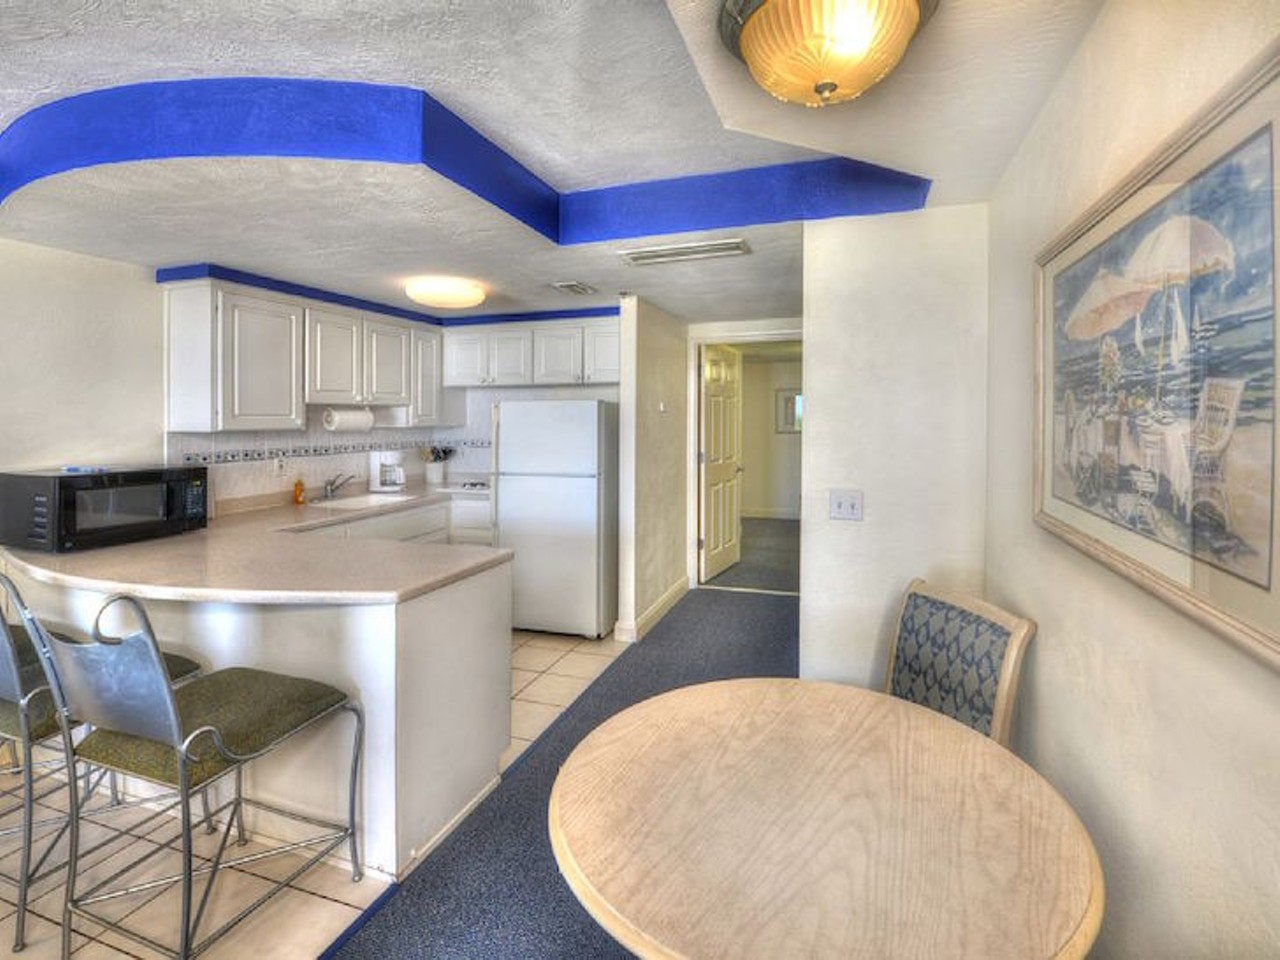  Take a vacation at the Daytona Beach Resort
Average night $134 
1 bedroom
The kitchen comes fully equipped with pots, pans, appliances, a full-sized fridge, and of course, an oven. The table is small, but you'll make do.